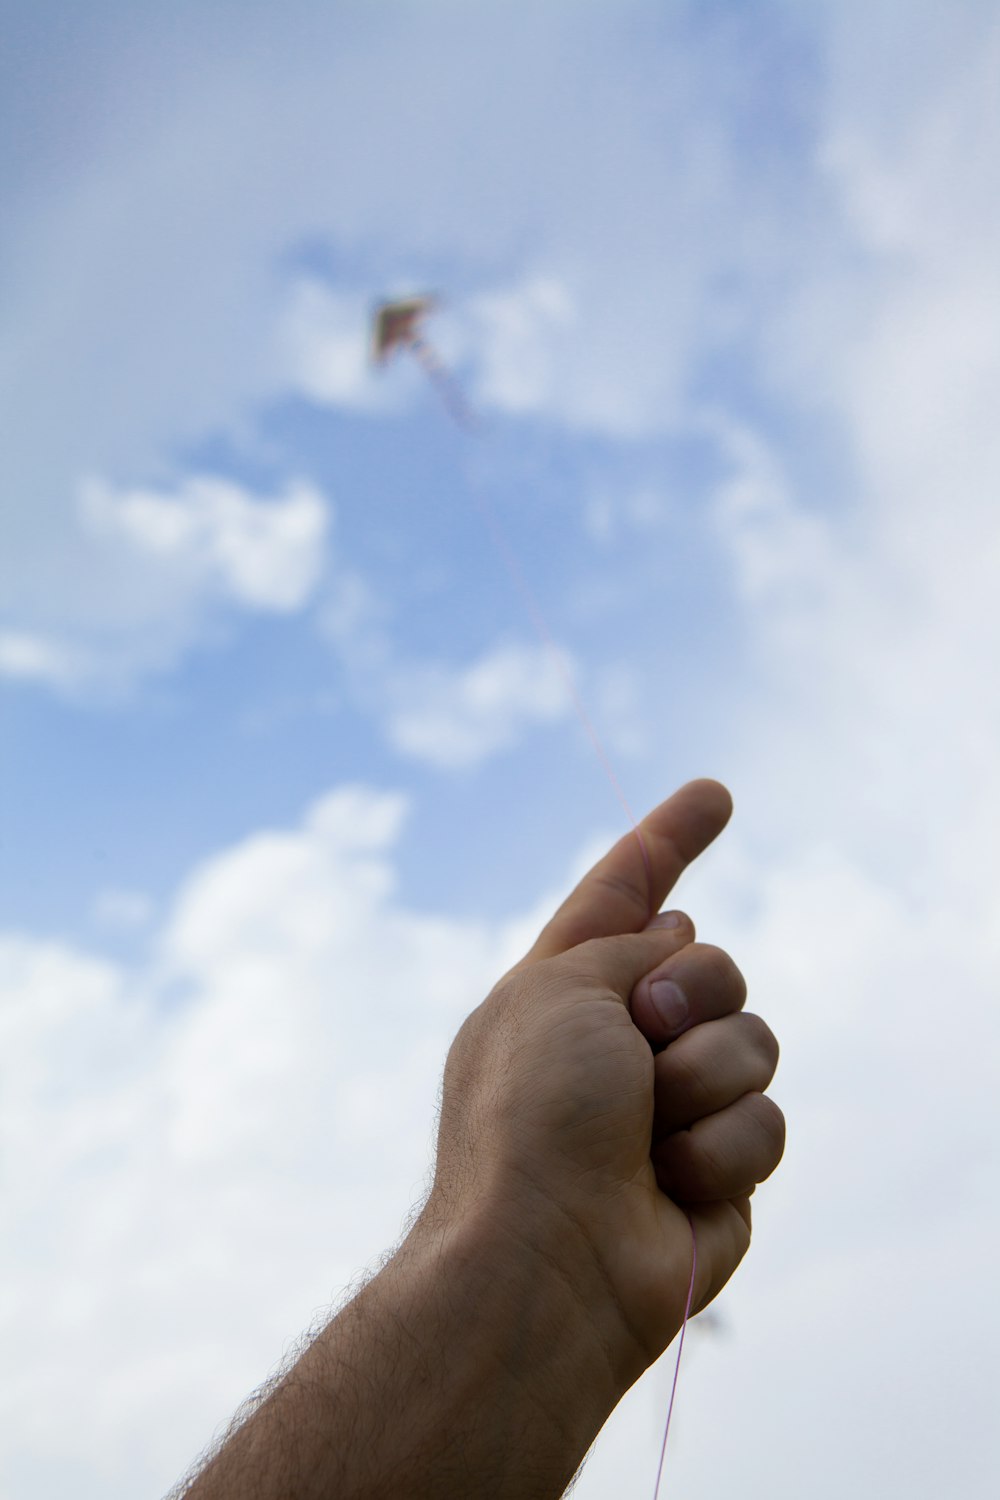 a person is flying a kite in the sky